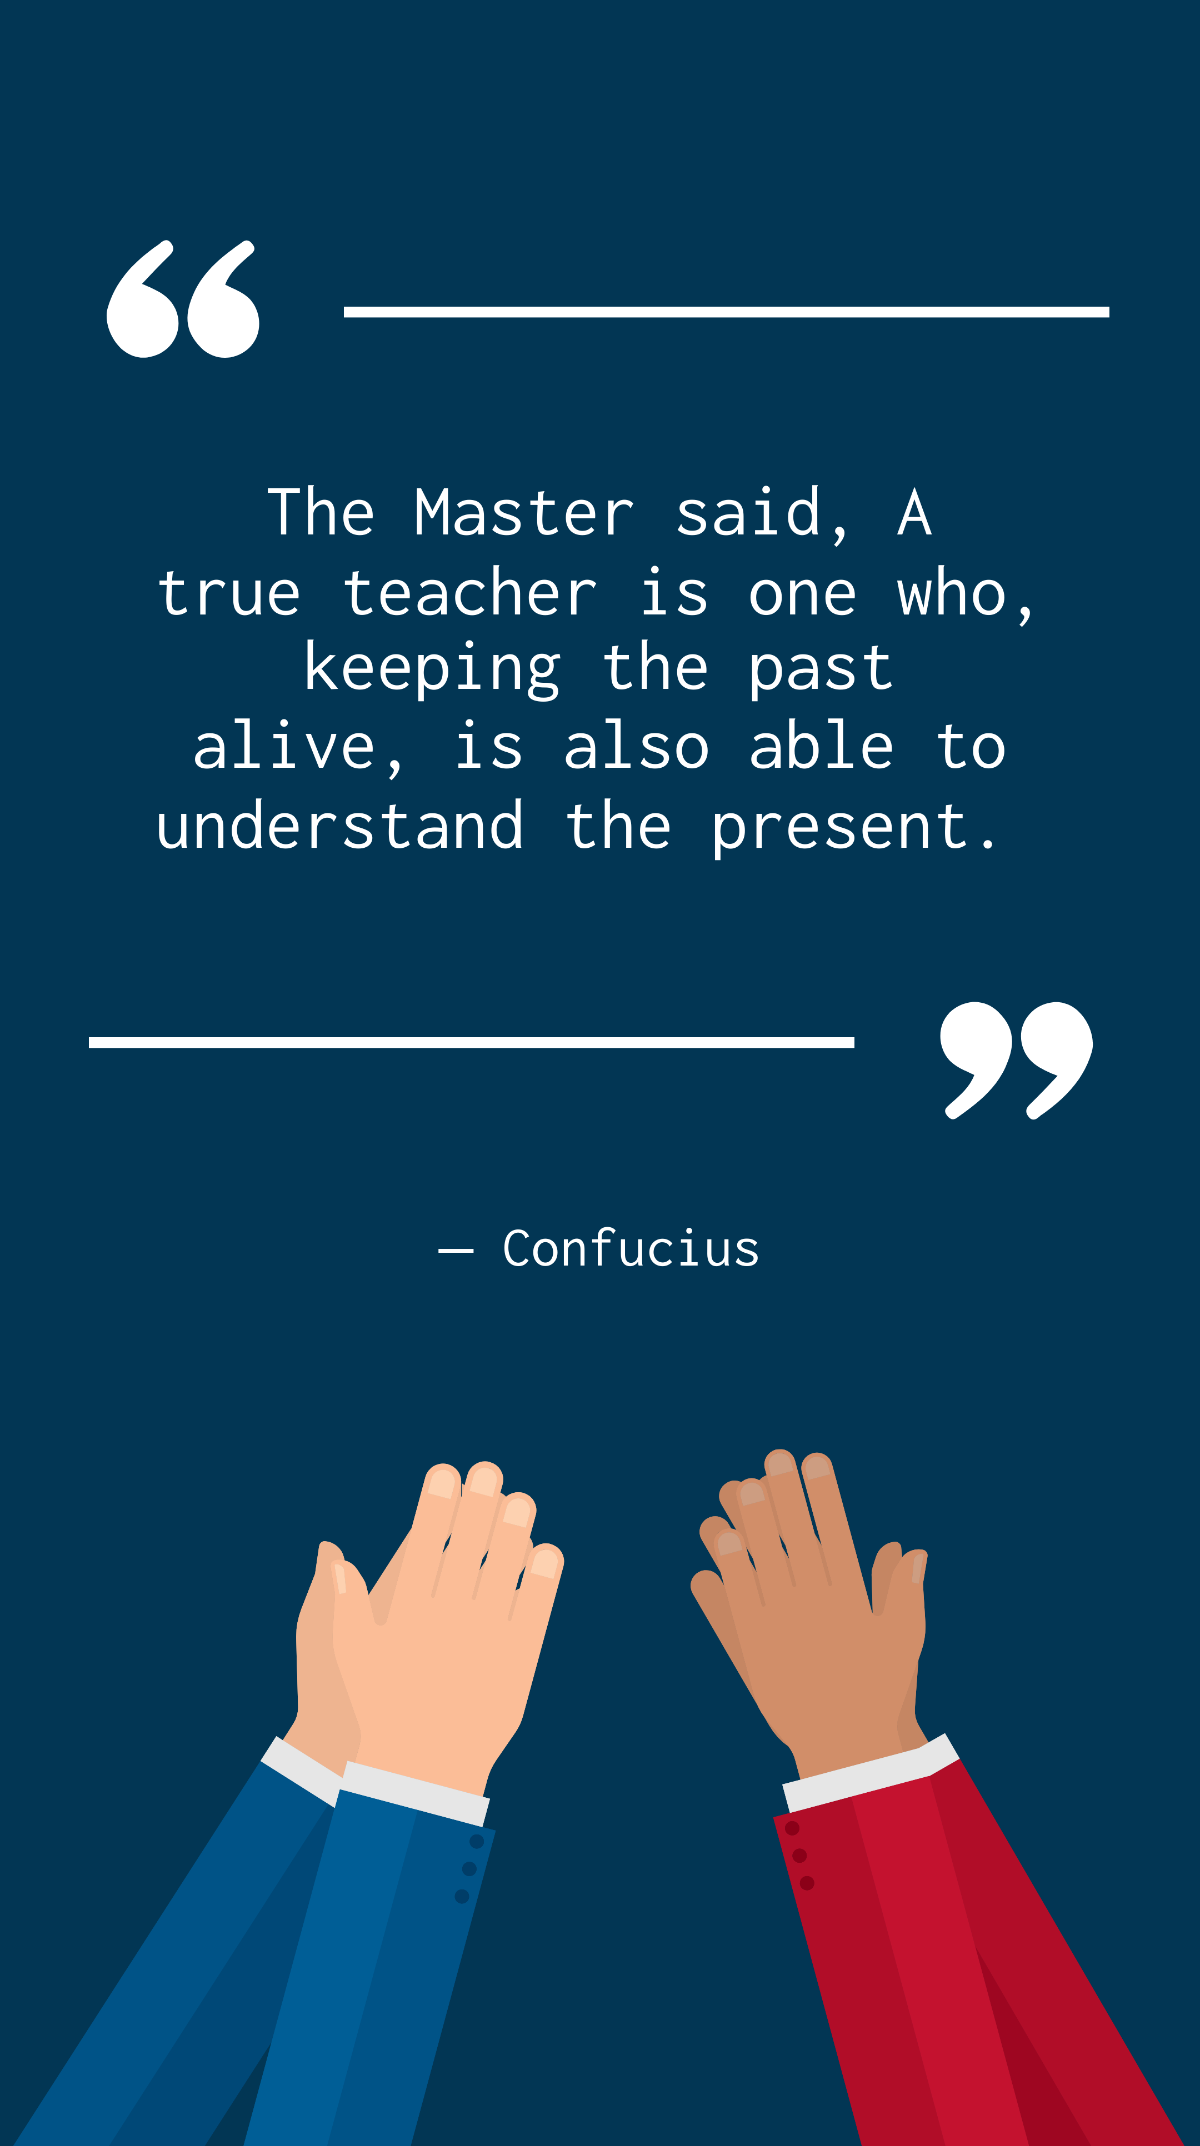 Confucius - The Master said, A true teacher is one who, keeping the past alive, is also able to understand the present.